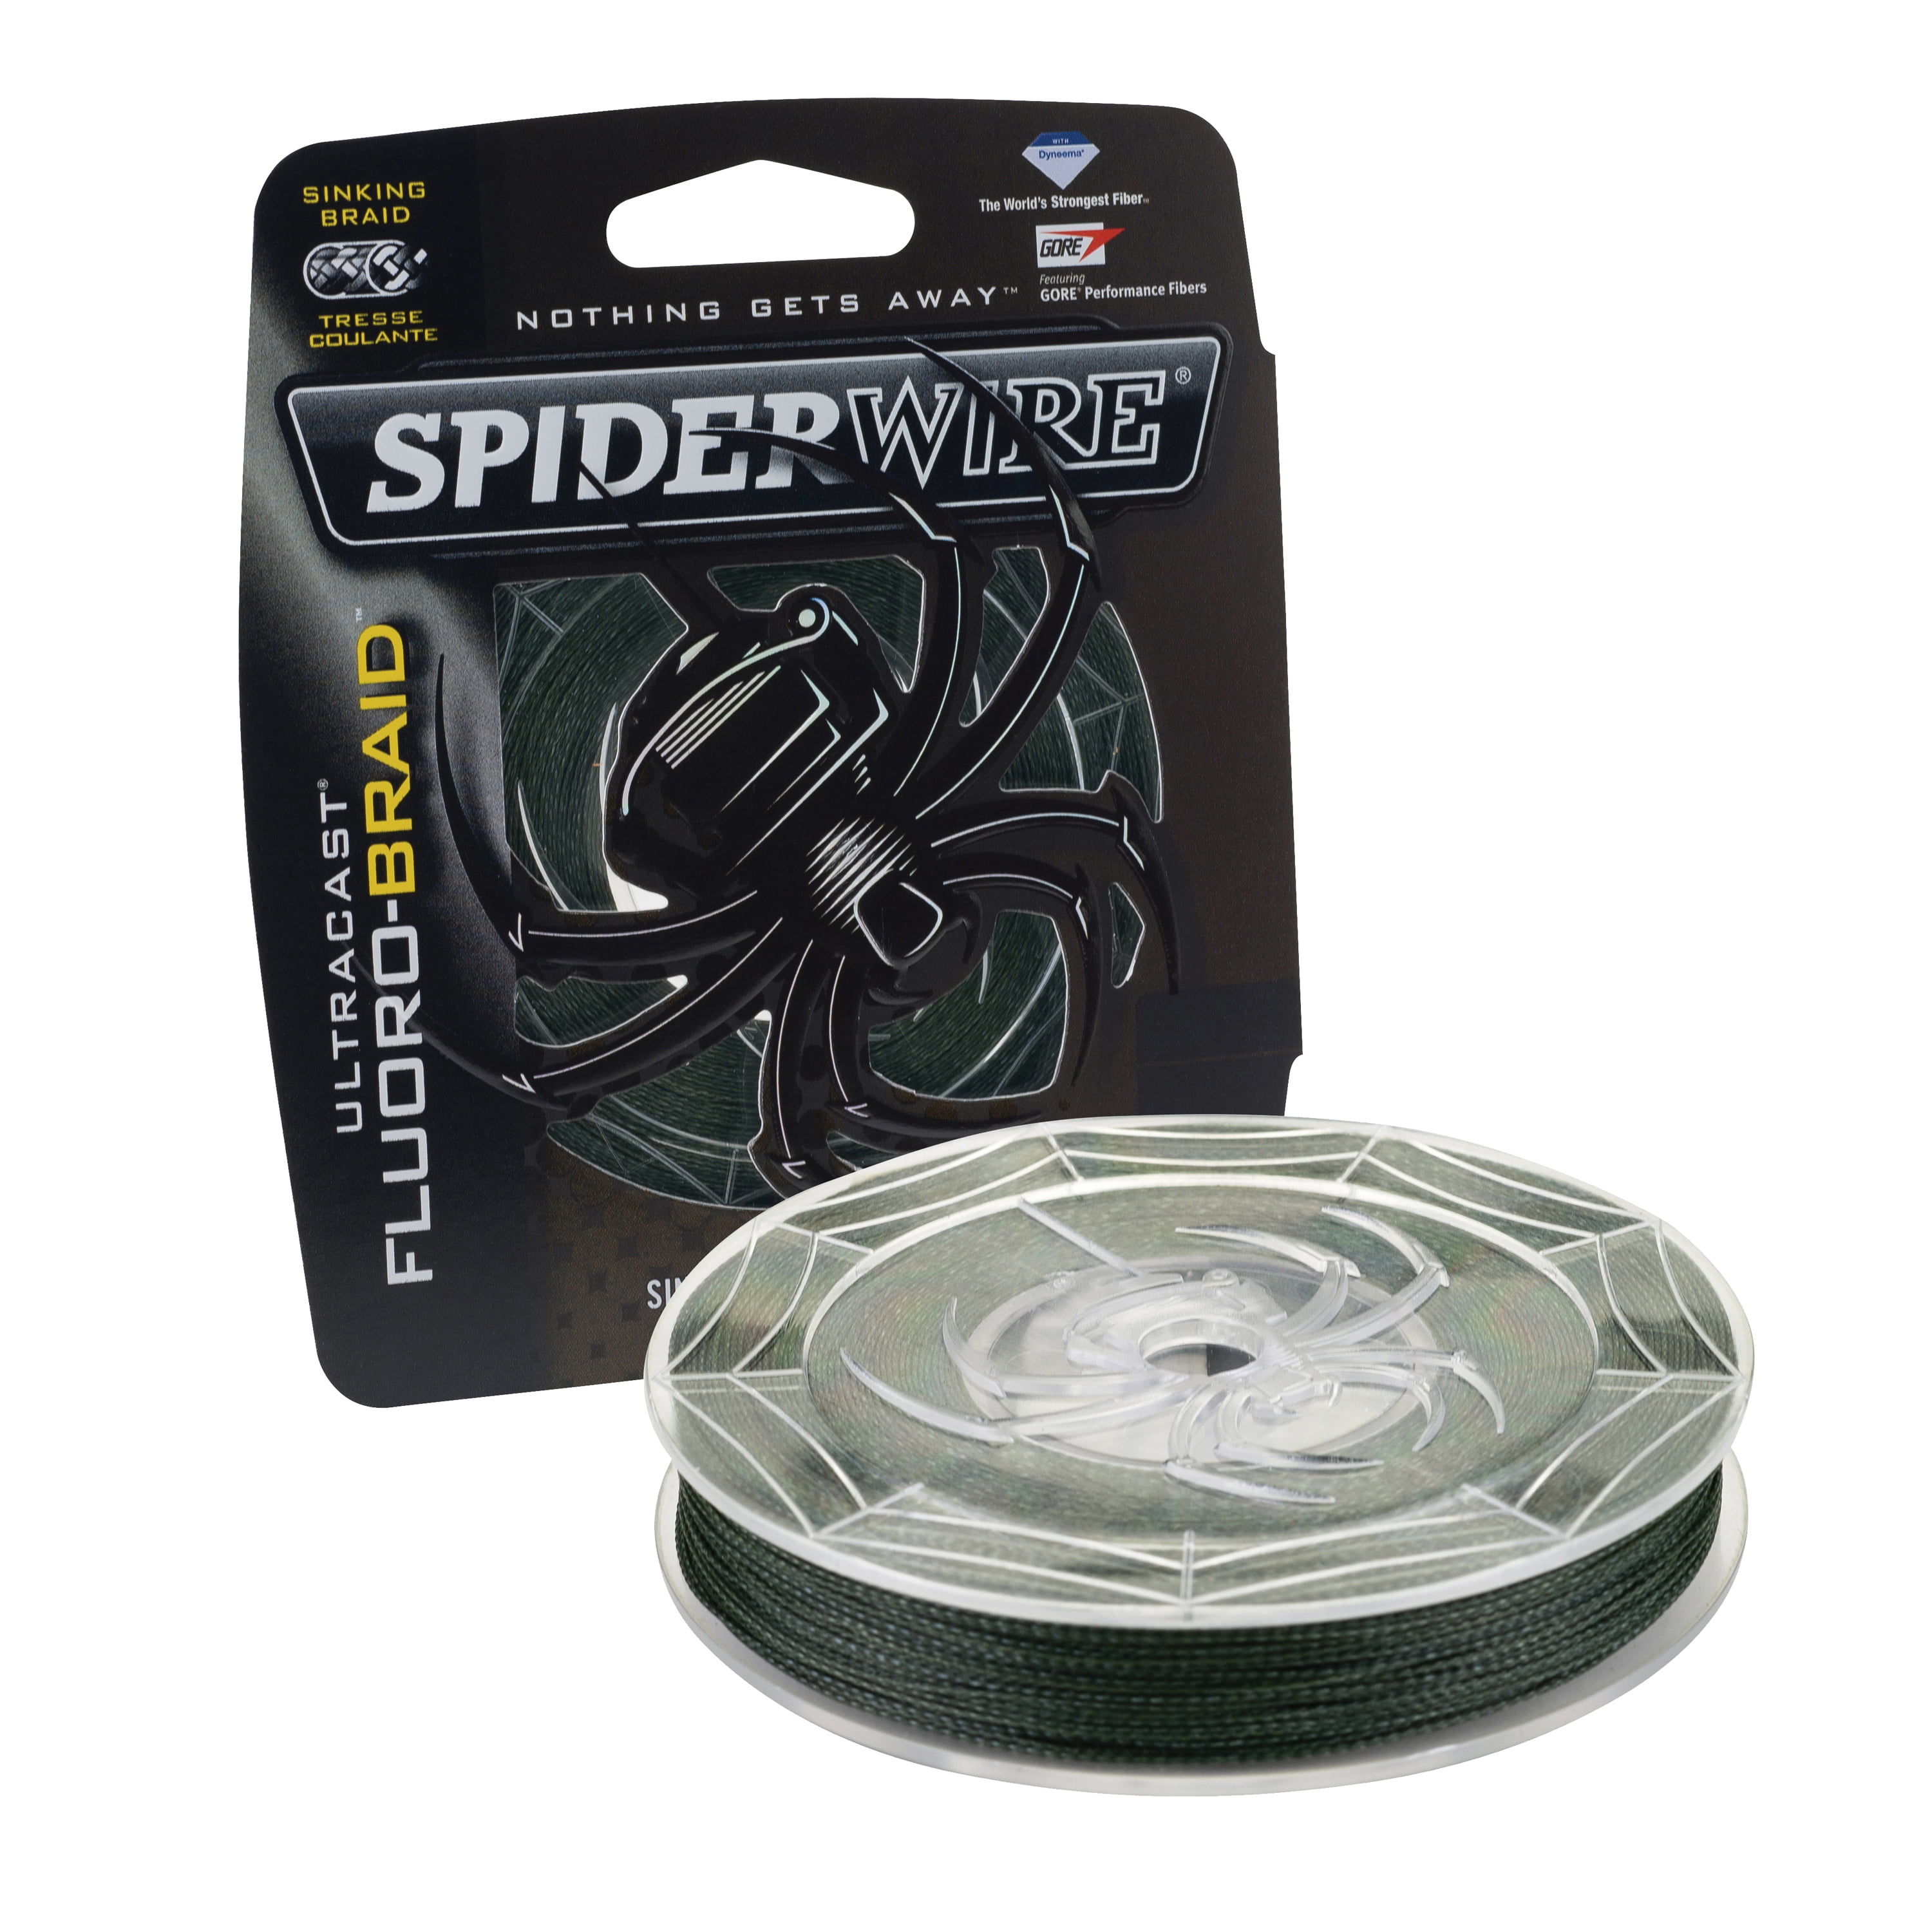 Spiderwire Fishing Line Stealth Smooth 8 (Moss Green, 150 m) at low prices